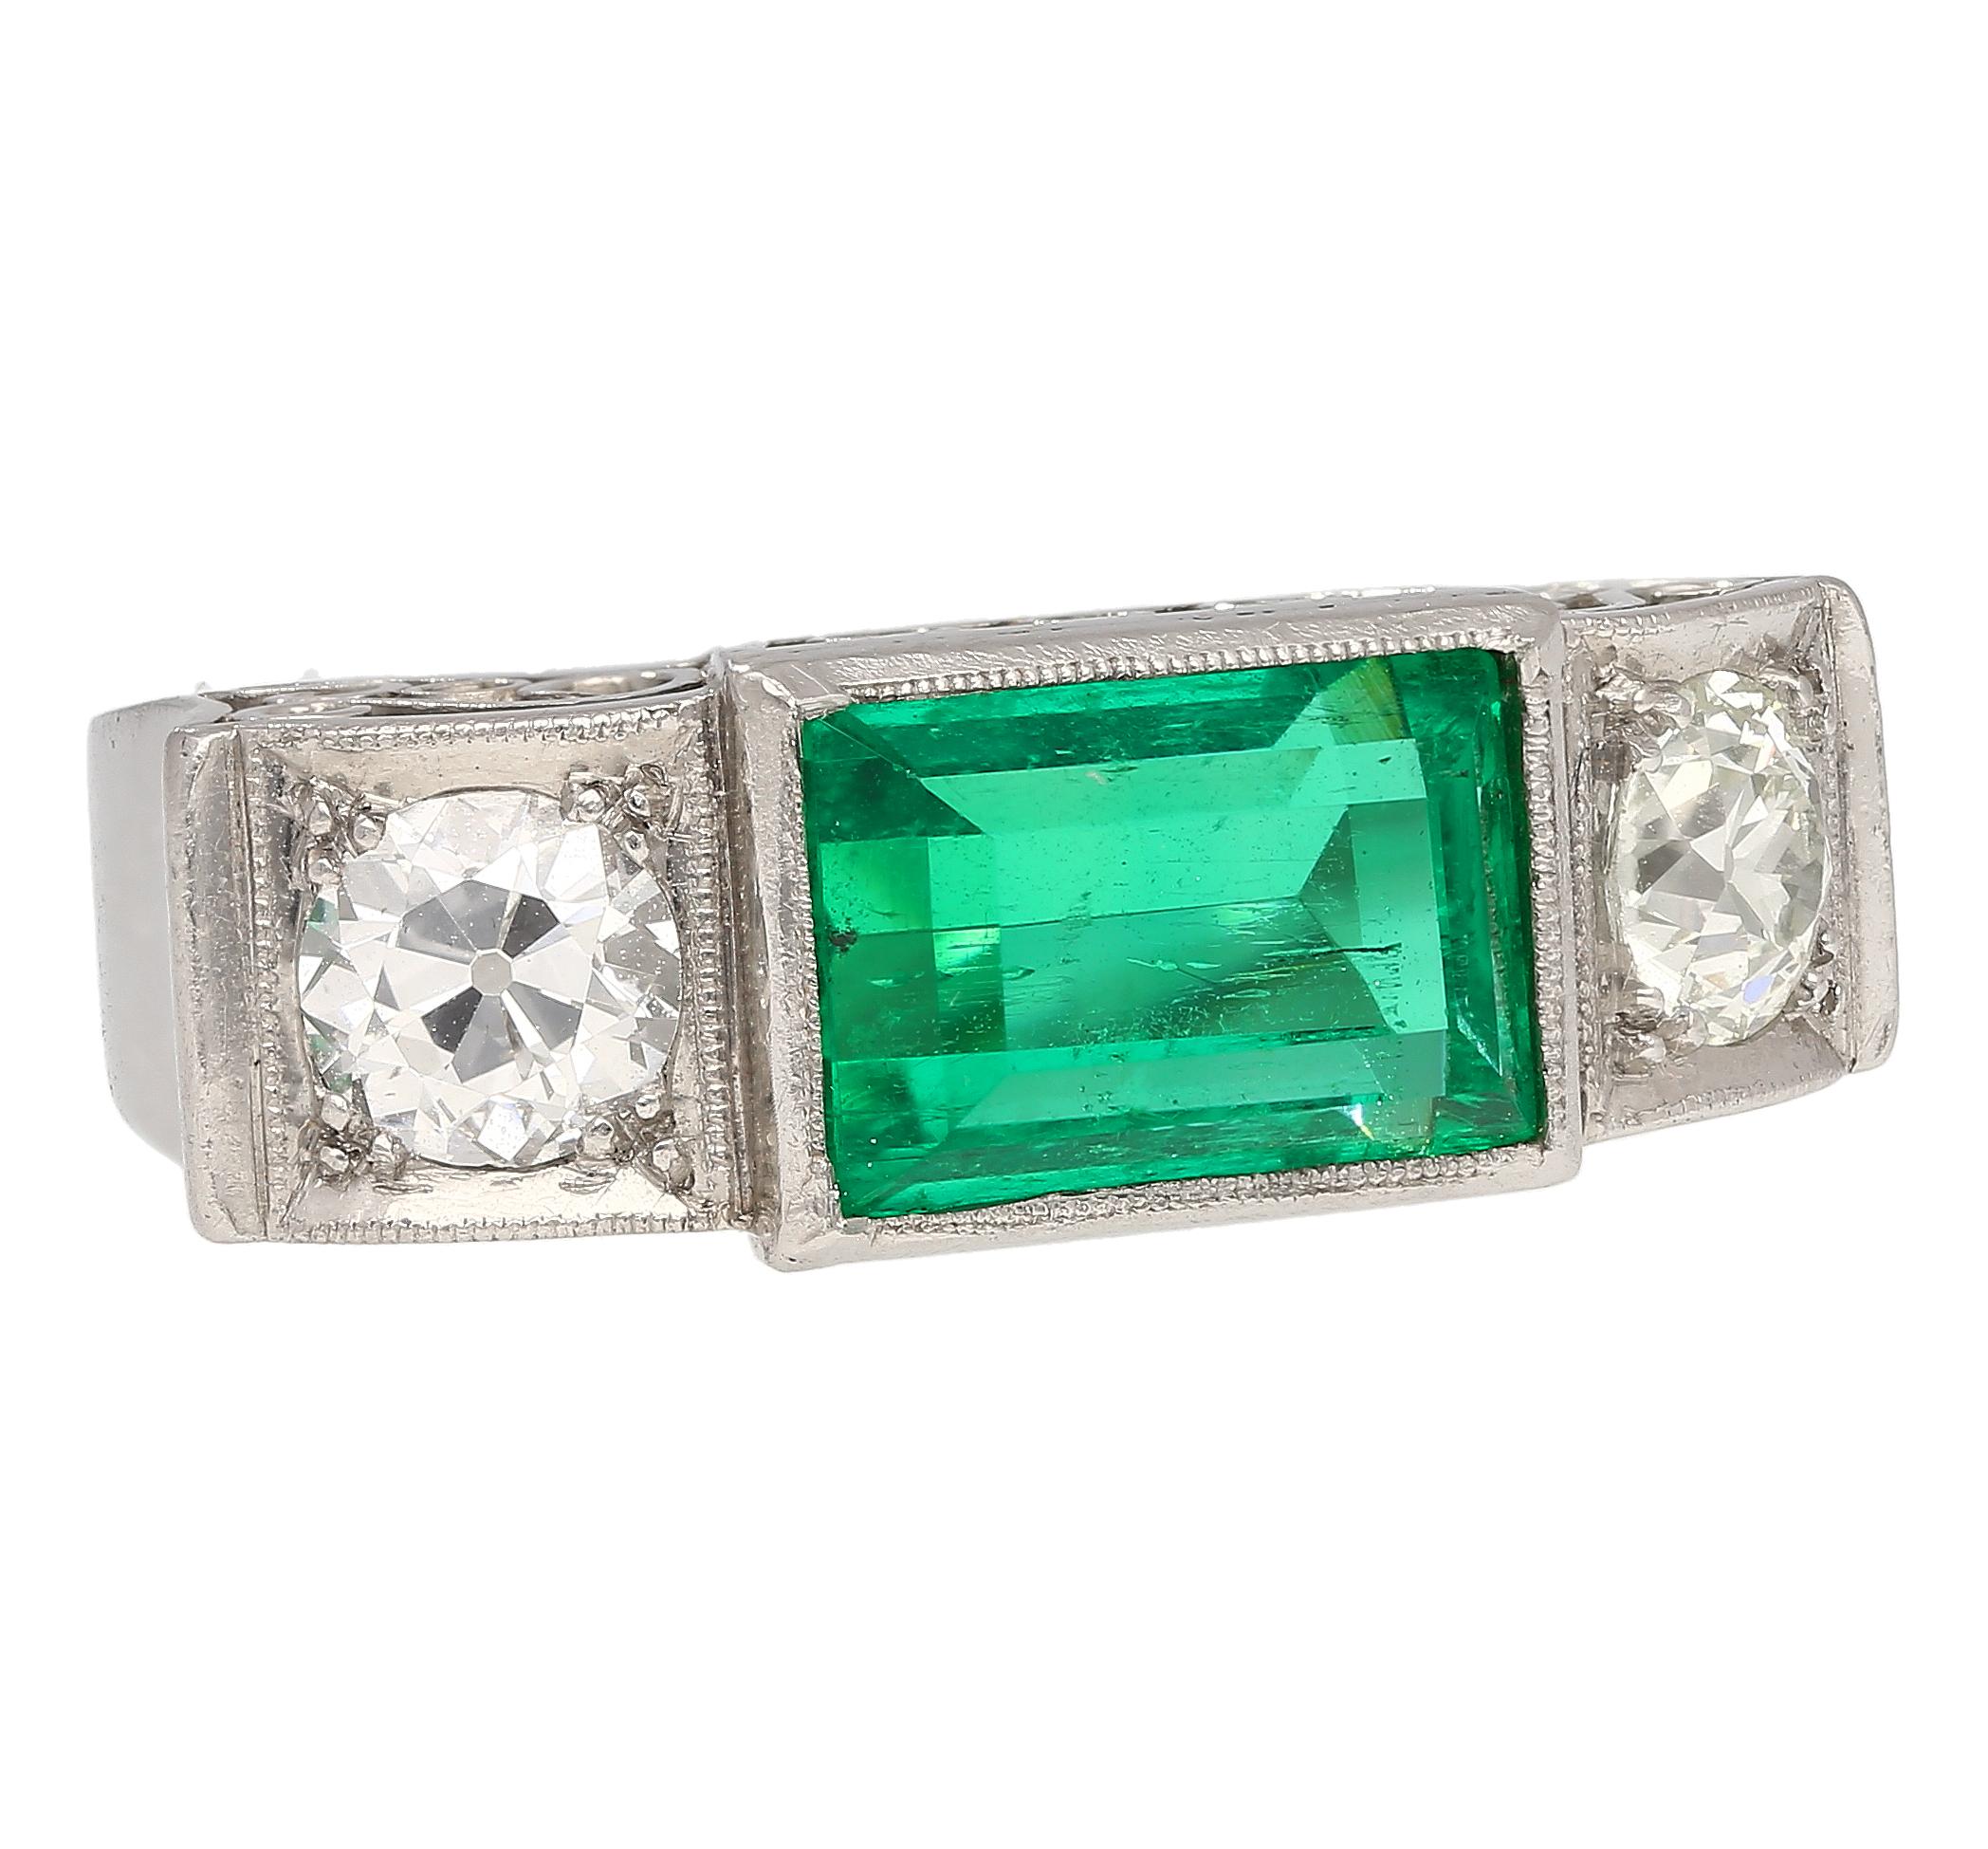 Vintage GIA Certified 3.10 Carat No Oil Colombian Emerald and Diamond Three-Stone Ring in Platinum. 

This Emerald was sourced from the legendary Muzo Mine, located in the western Boyaca province of the Andes Mountains. Set in a stunning filigree